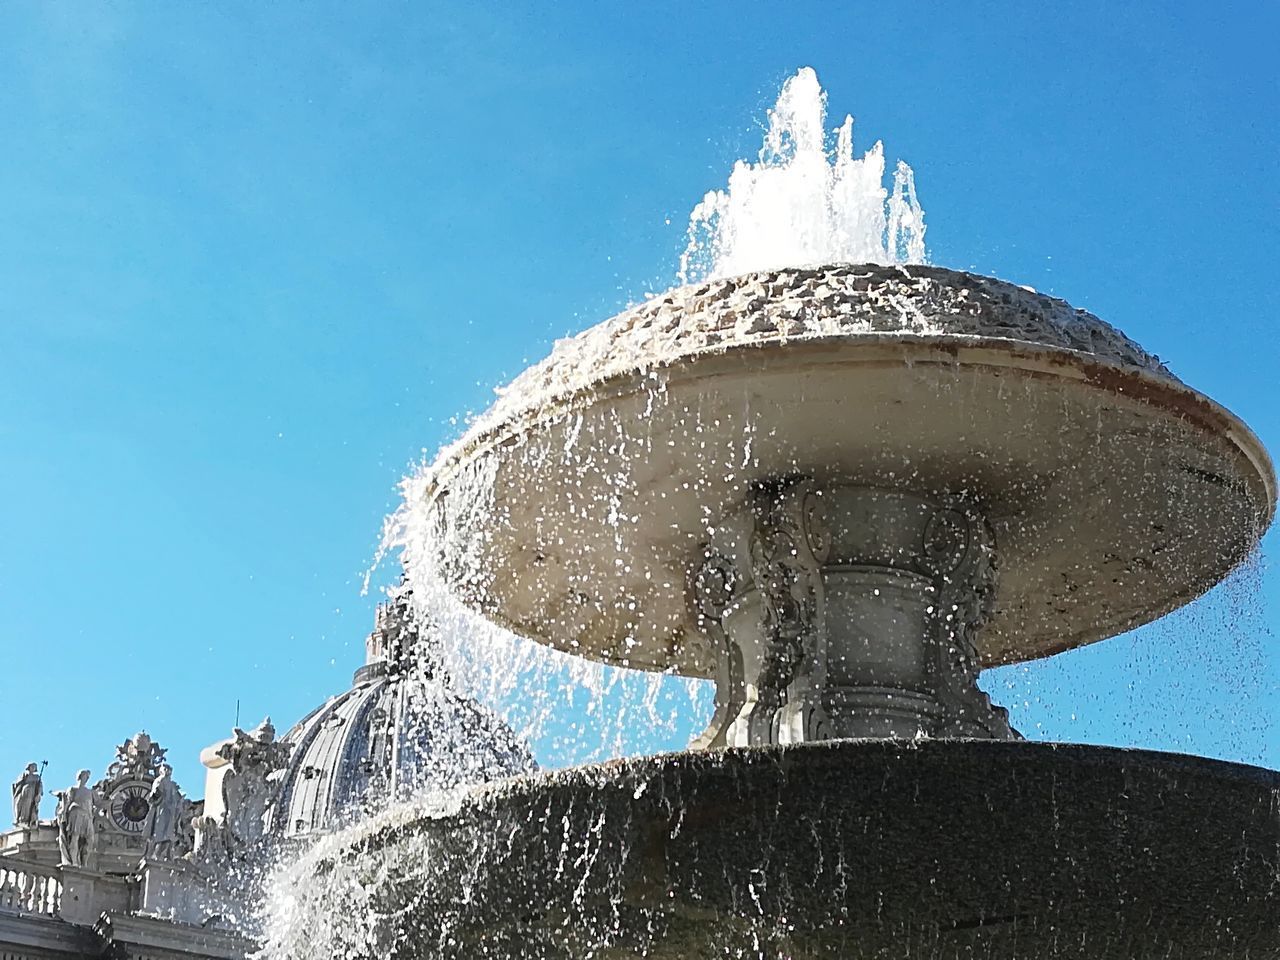 LOW ANGLE VIEW OF FOUNTAIN IN CITY AGAINST BLUE SKY